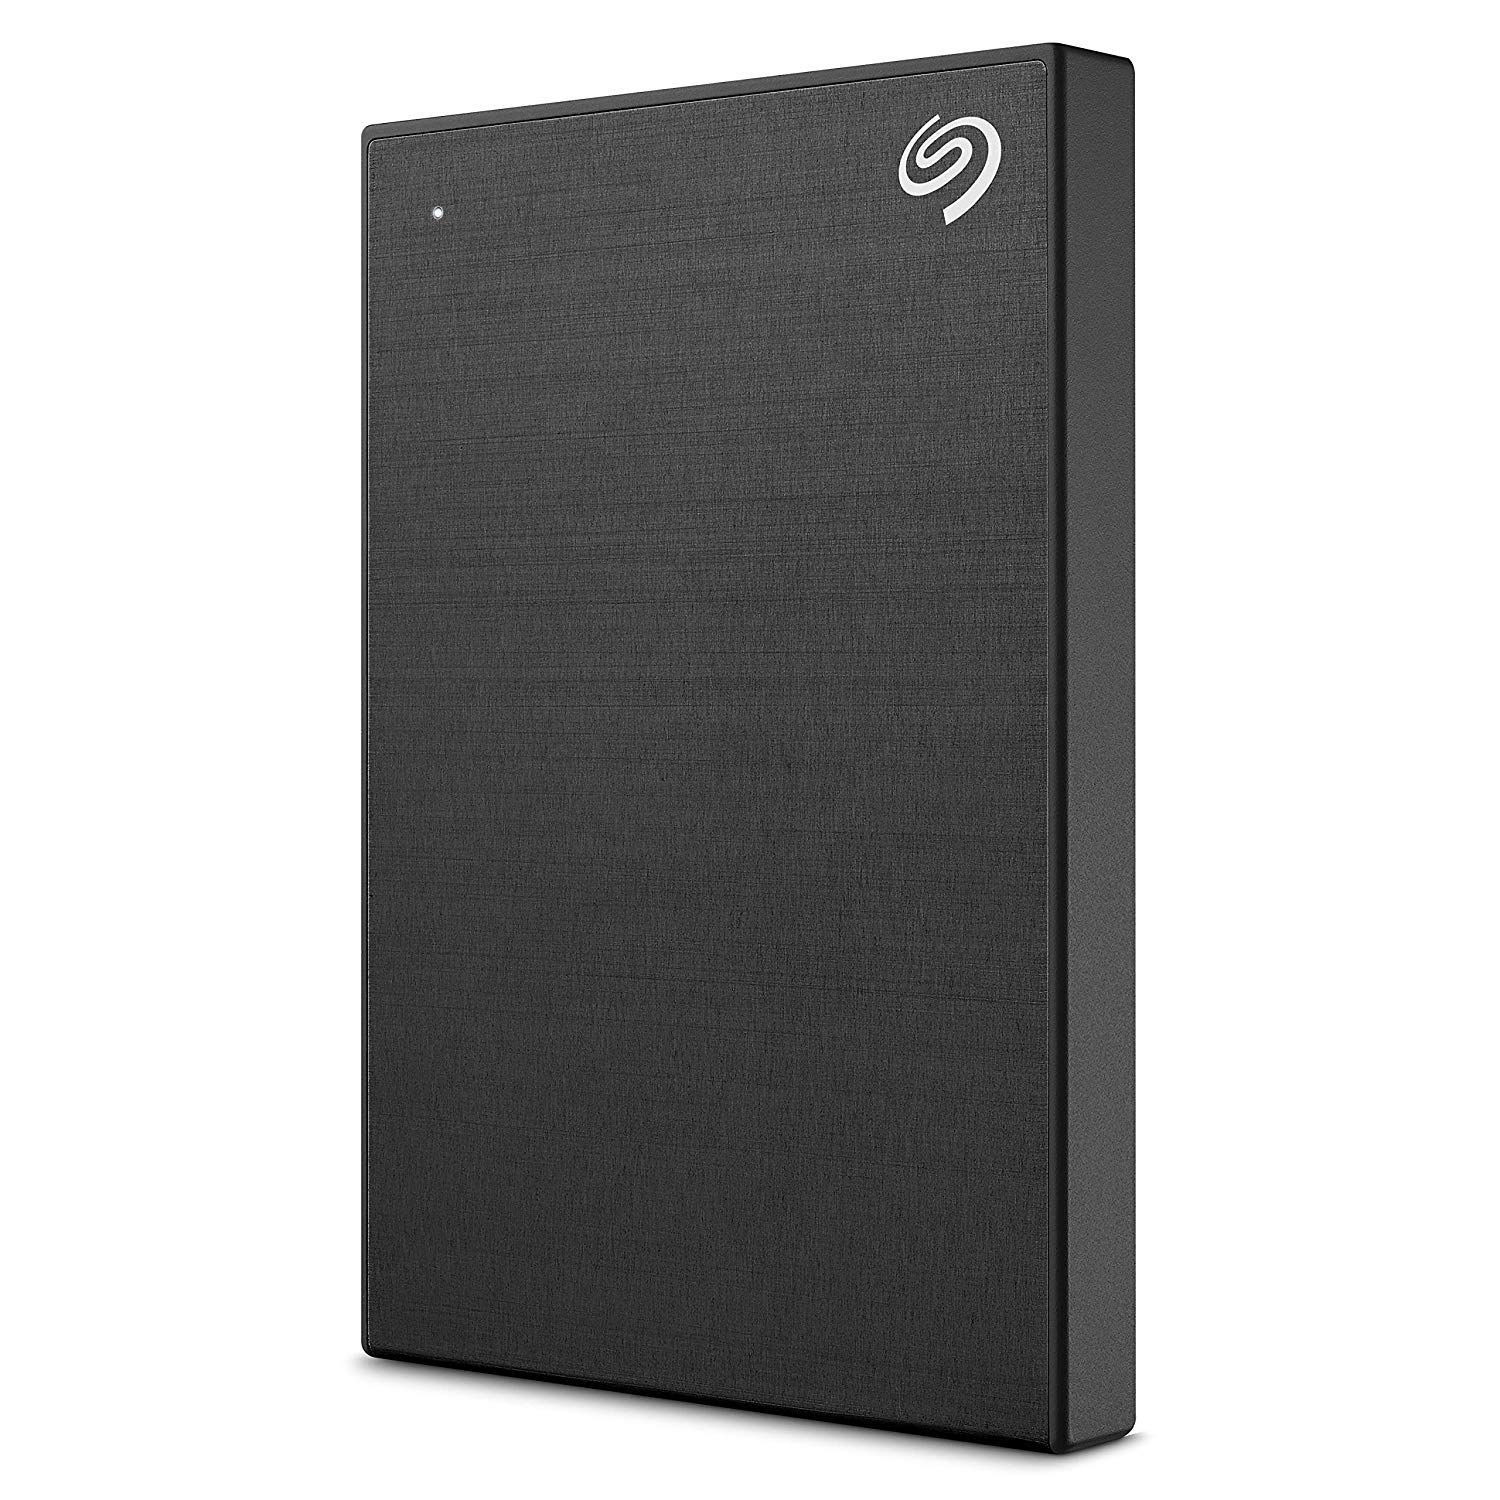 how to use seagate backup plus on windows